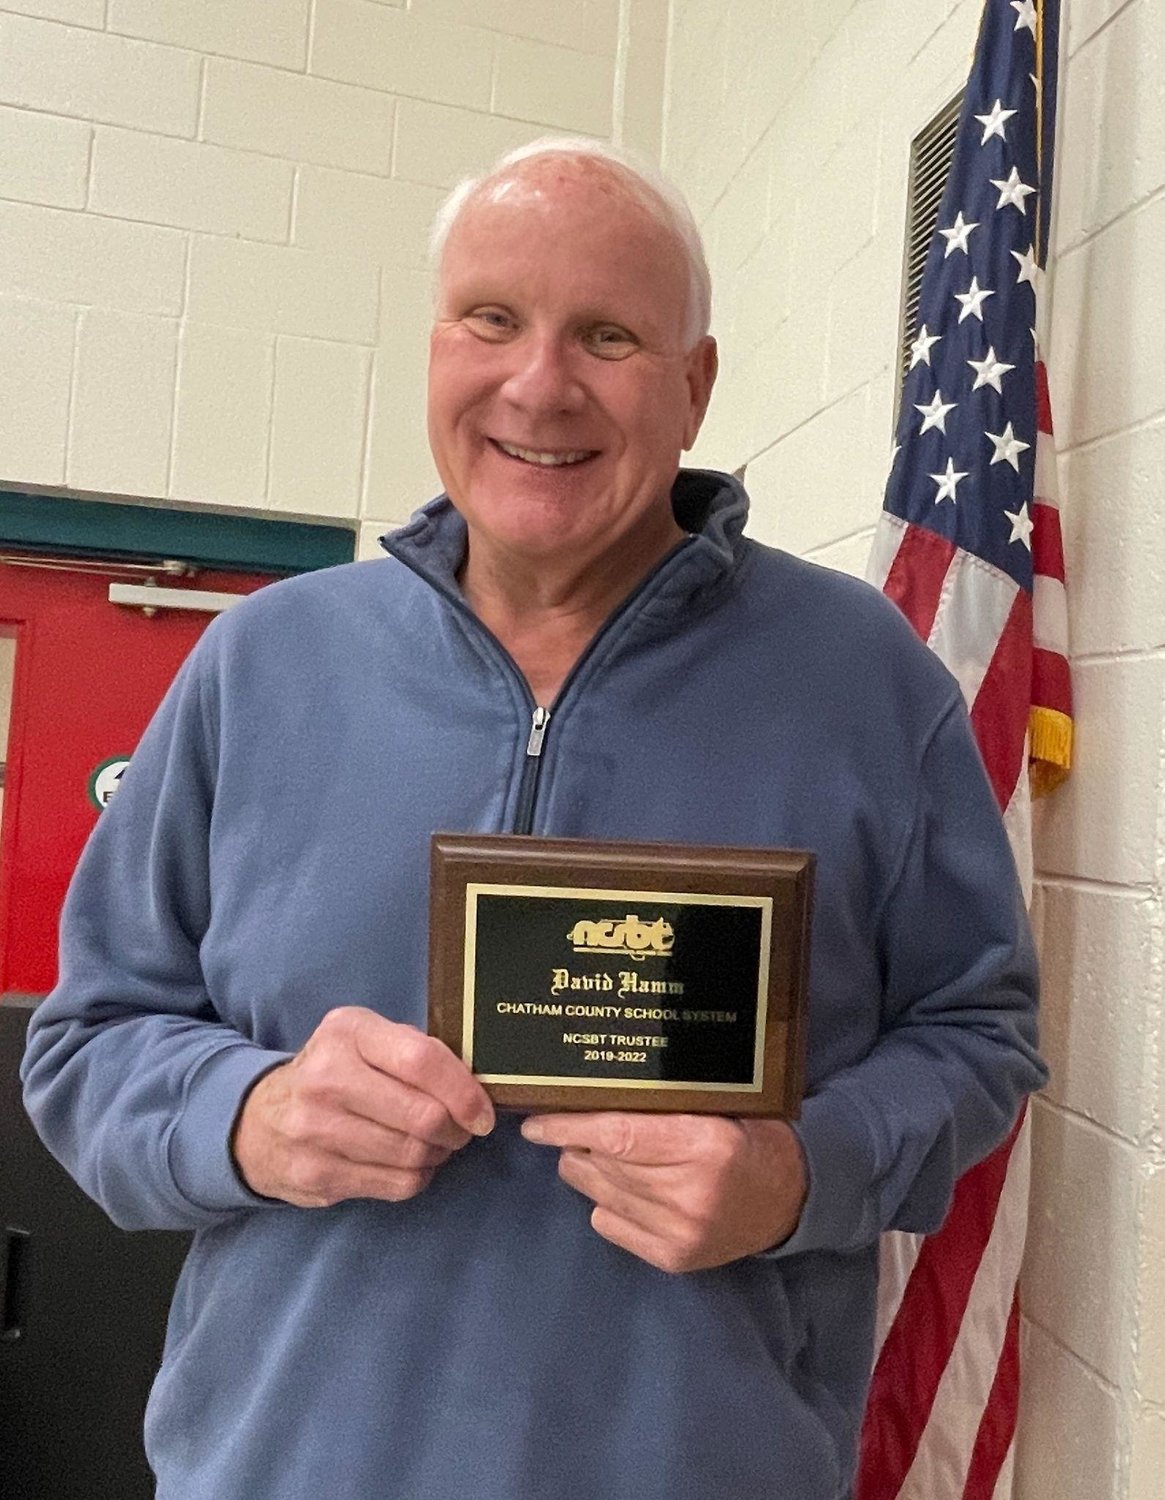 The North Carolina School Boards Trust recently honored Chatham County Board of Education member David Hamm for his years of service on the state organization’s Board of Directors.